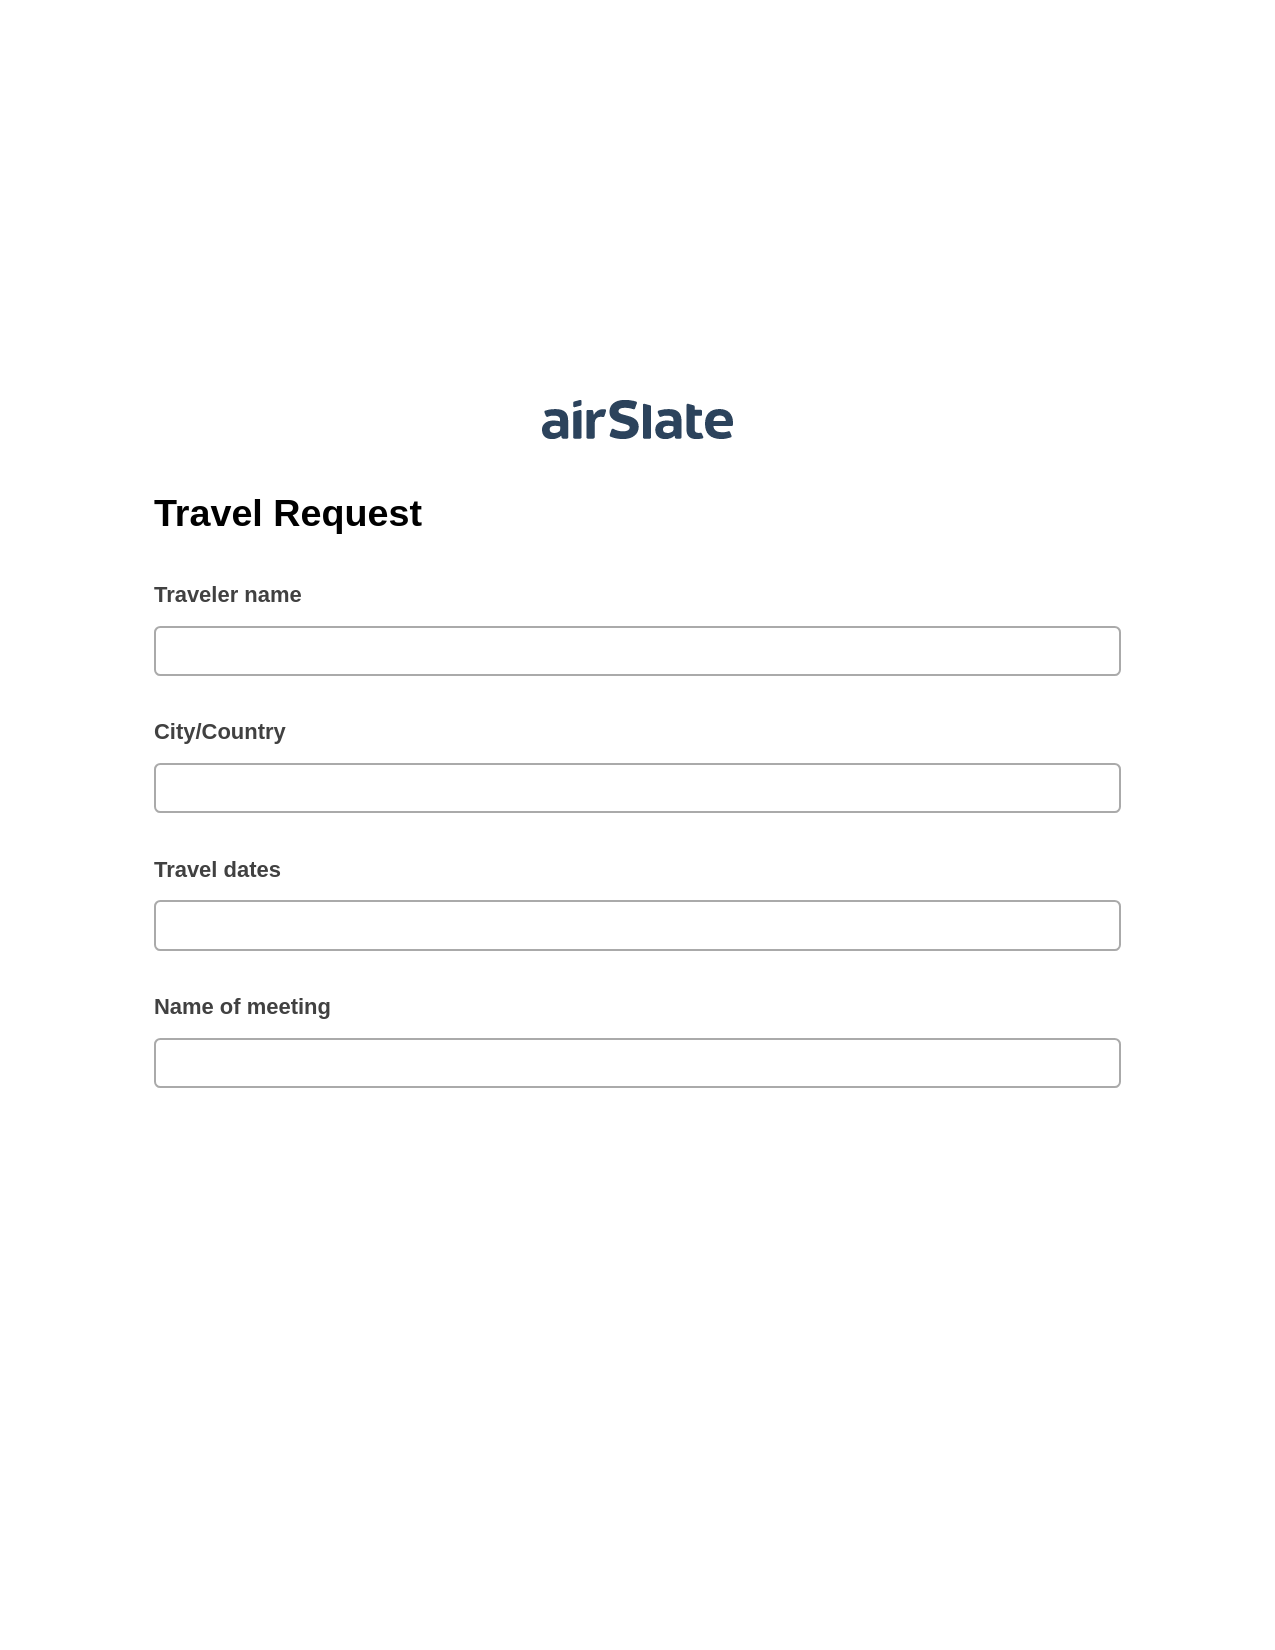 Travel Request Pre-fill Document Bot, Email Notification Bot, Export to Formstack Documents Bot